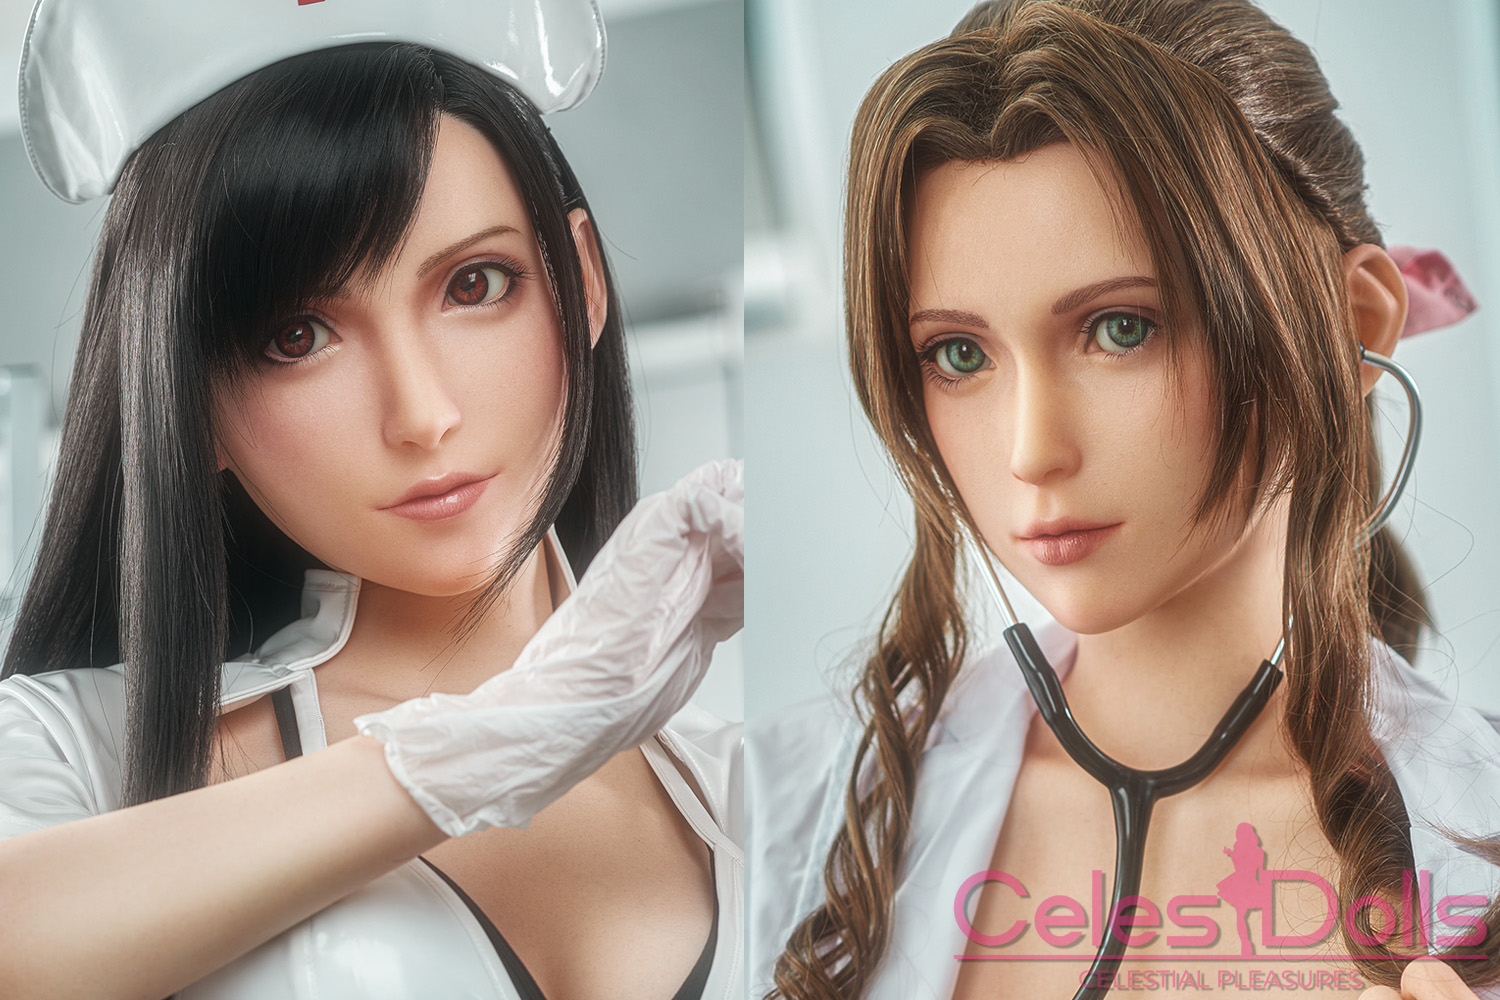 You are currently viewing Photos of Game Lady’s Nurse Tifa & Aerith Sex Dolls